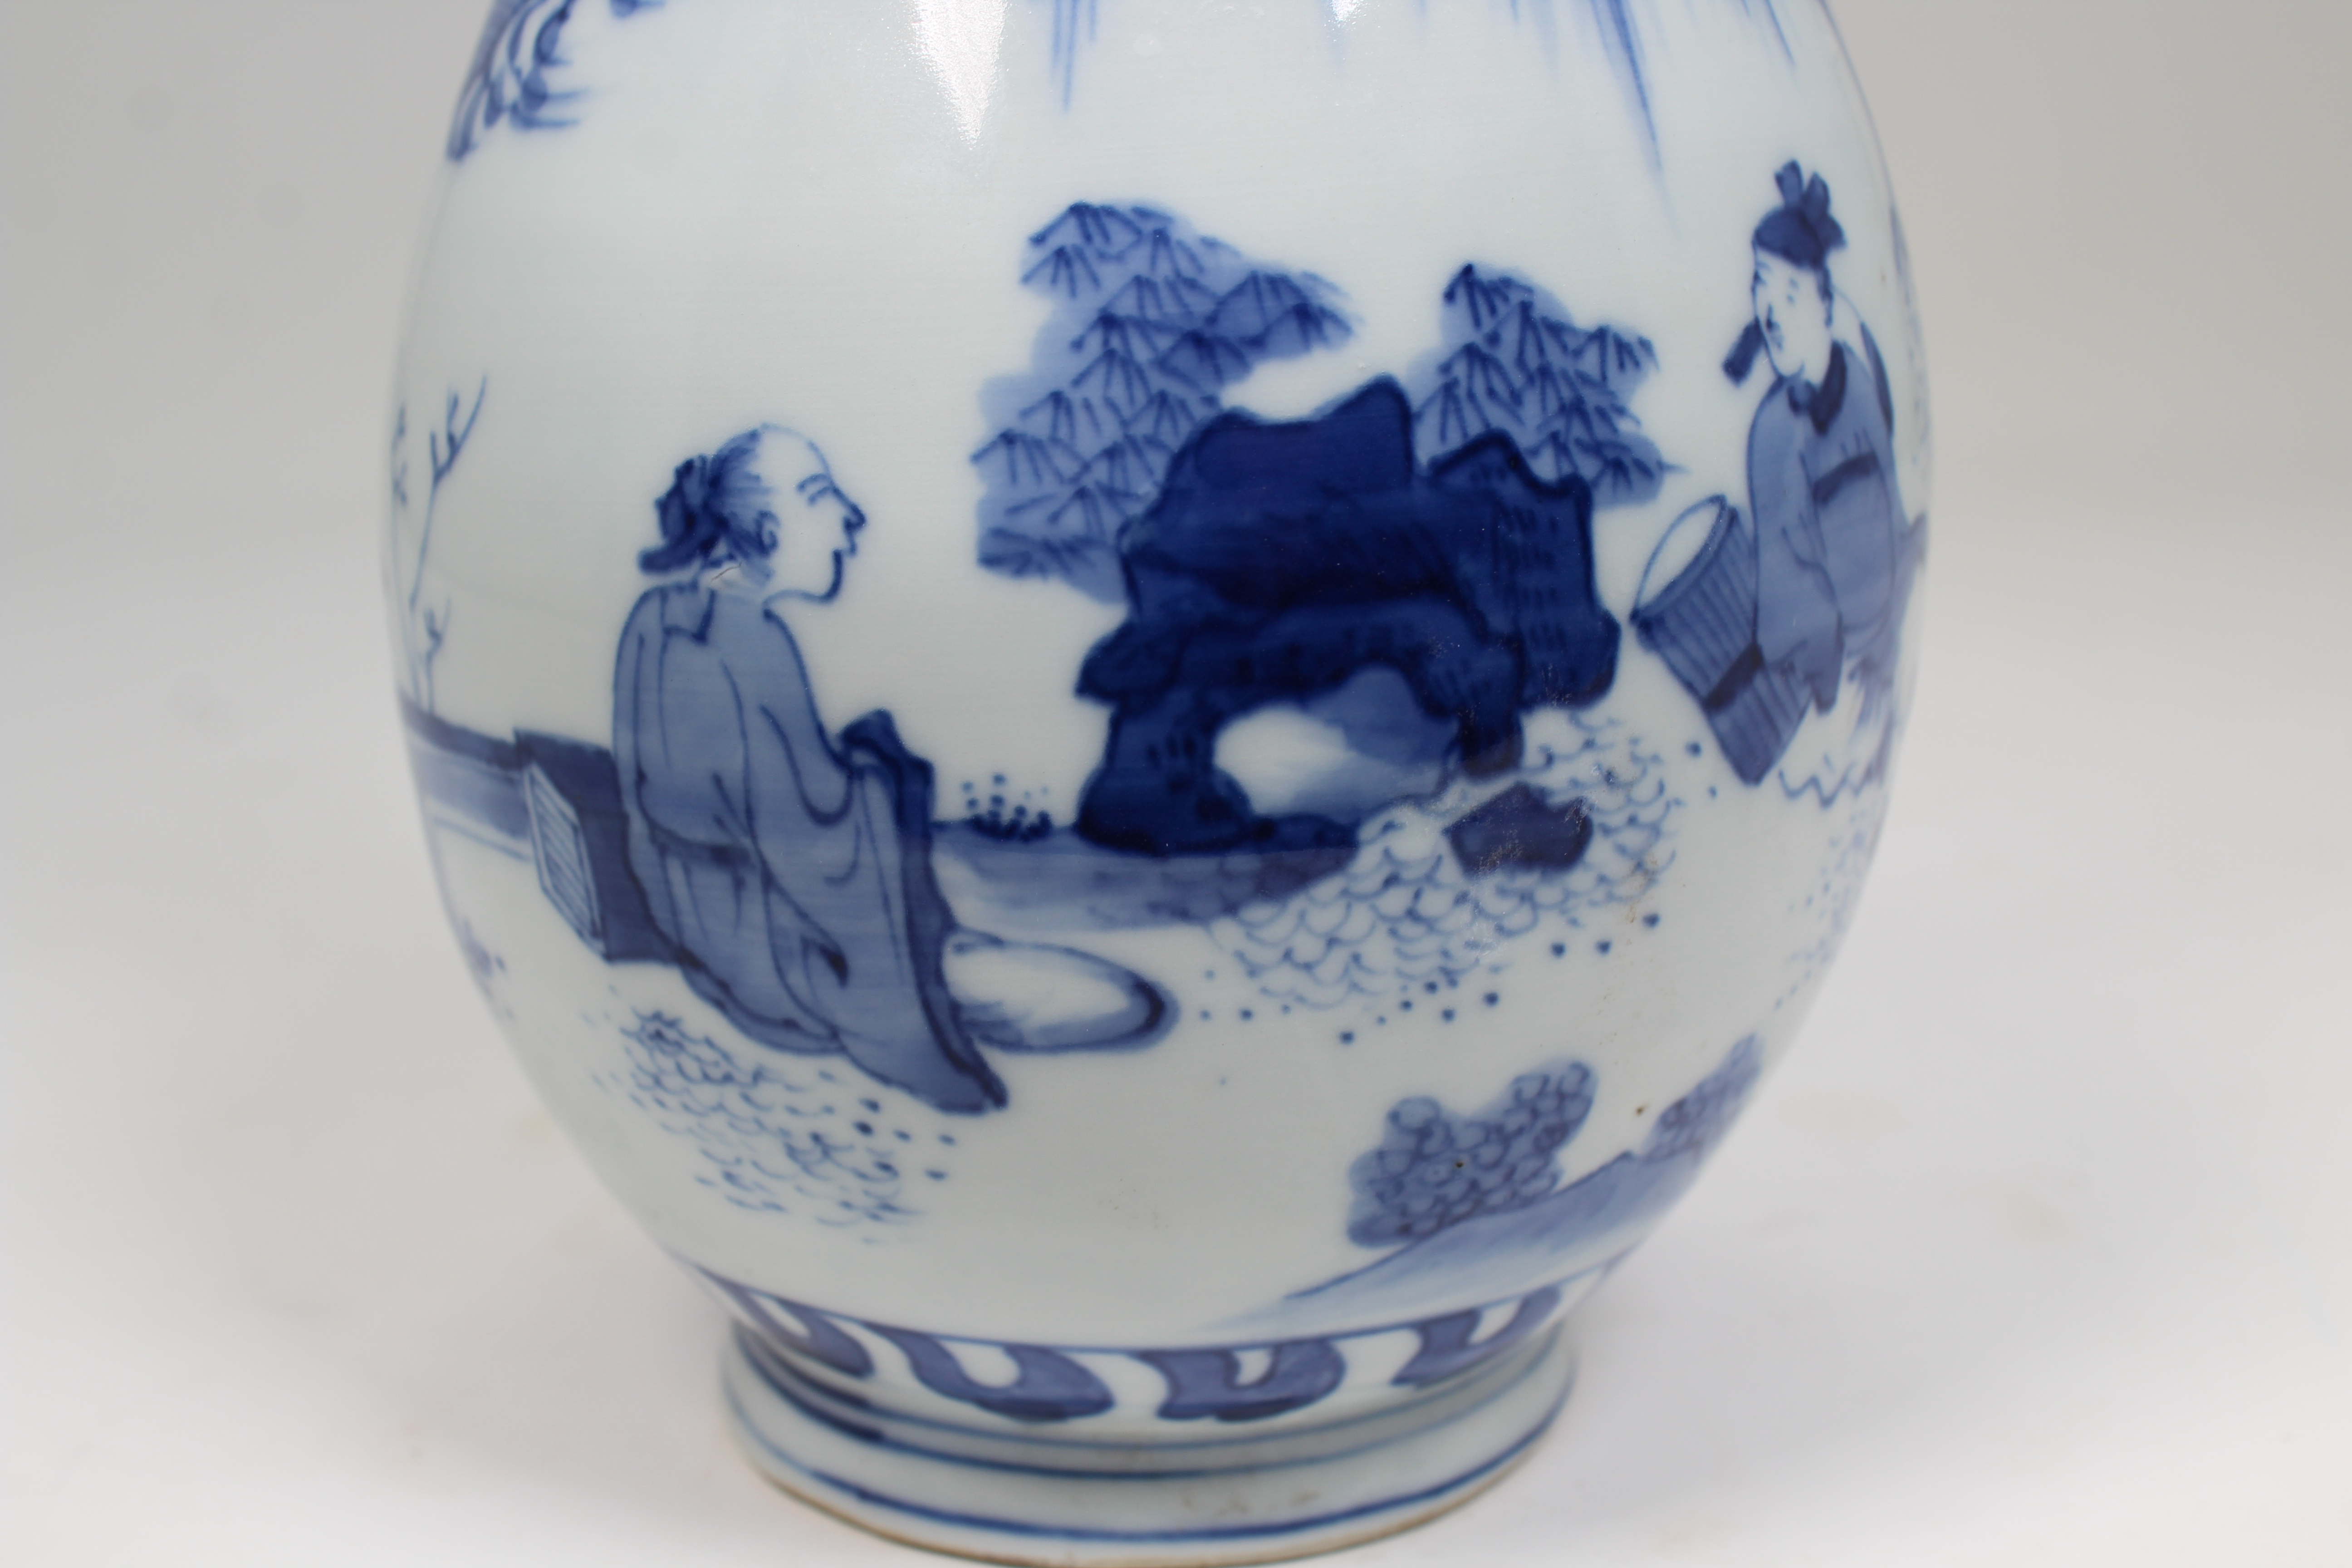 Chinese Blue/White Porcelain Vase. Scene depicts figures conversing. Size: 9 x 4.75 in. - Image 4 of 8